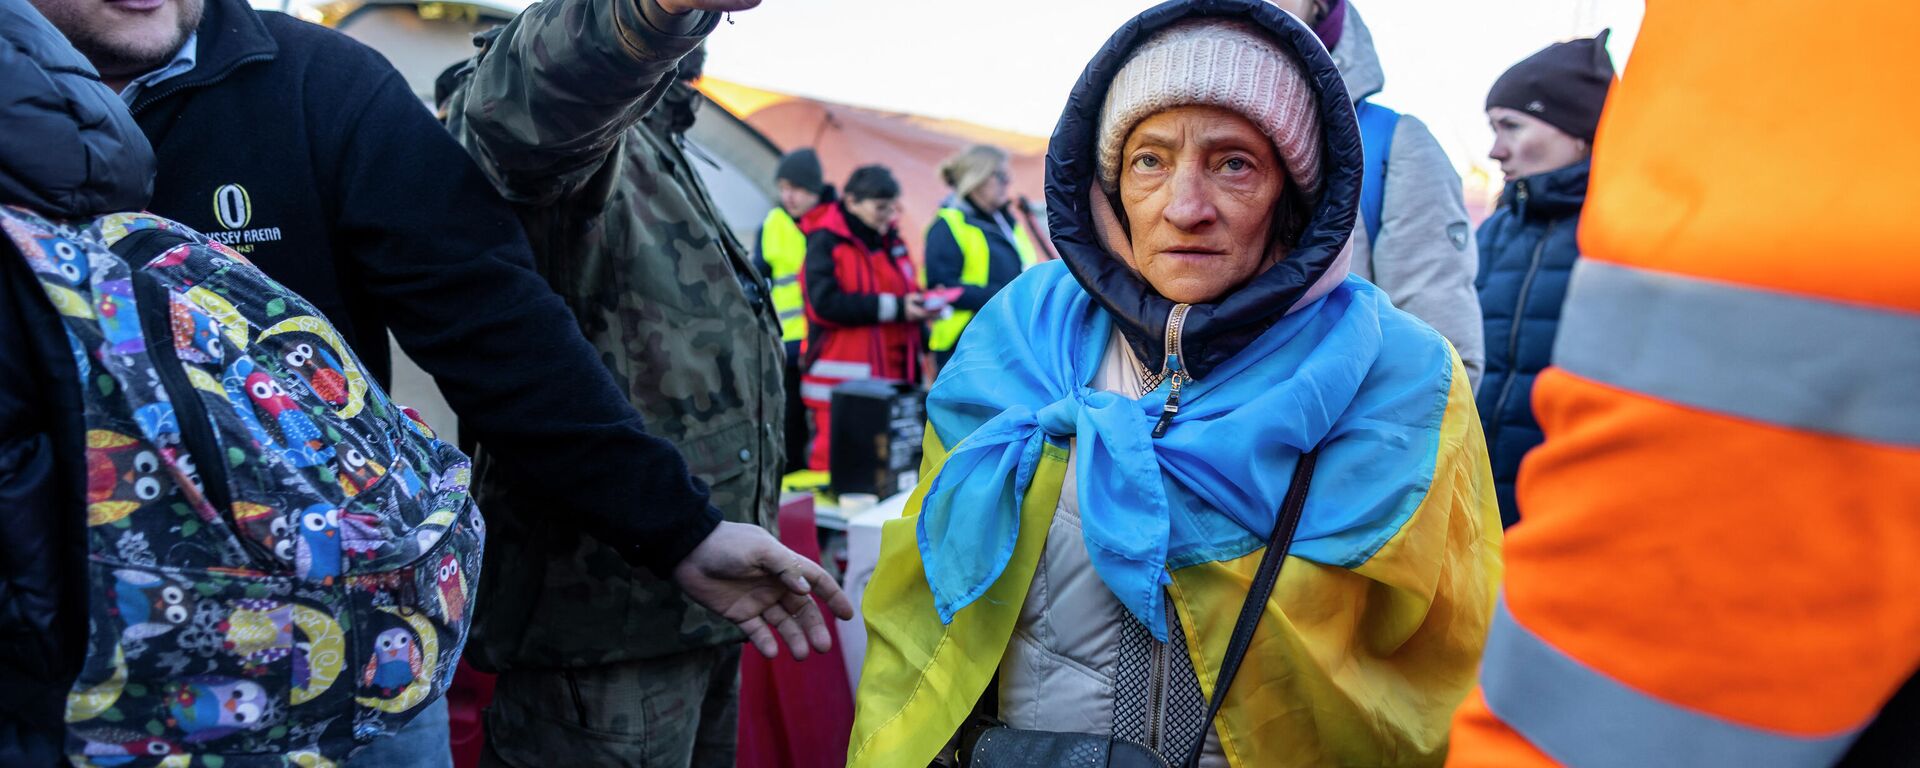 People, including an elderly woman wearing a Unkraine flag, line up to get into the buses for further transportation at the Medyka Polish-Ukrainian border crossing on March 18, 2022 - Sputnik International, 1920, 19.03.2022